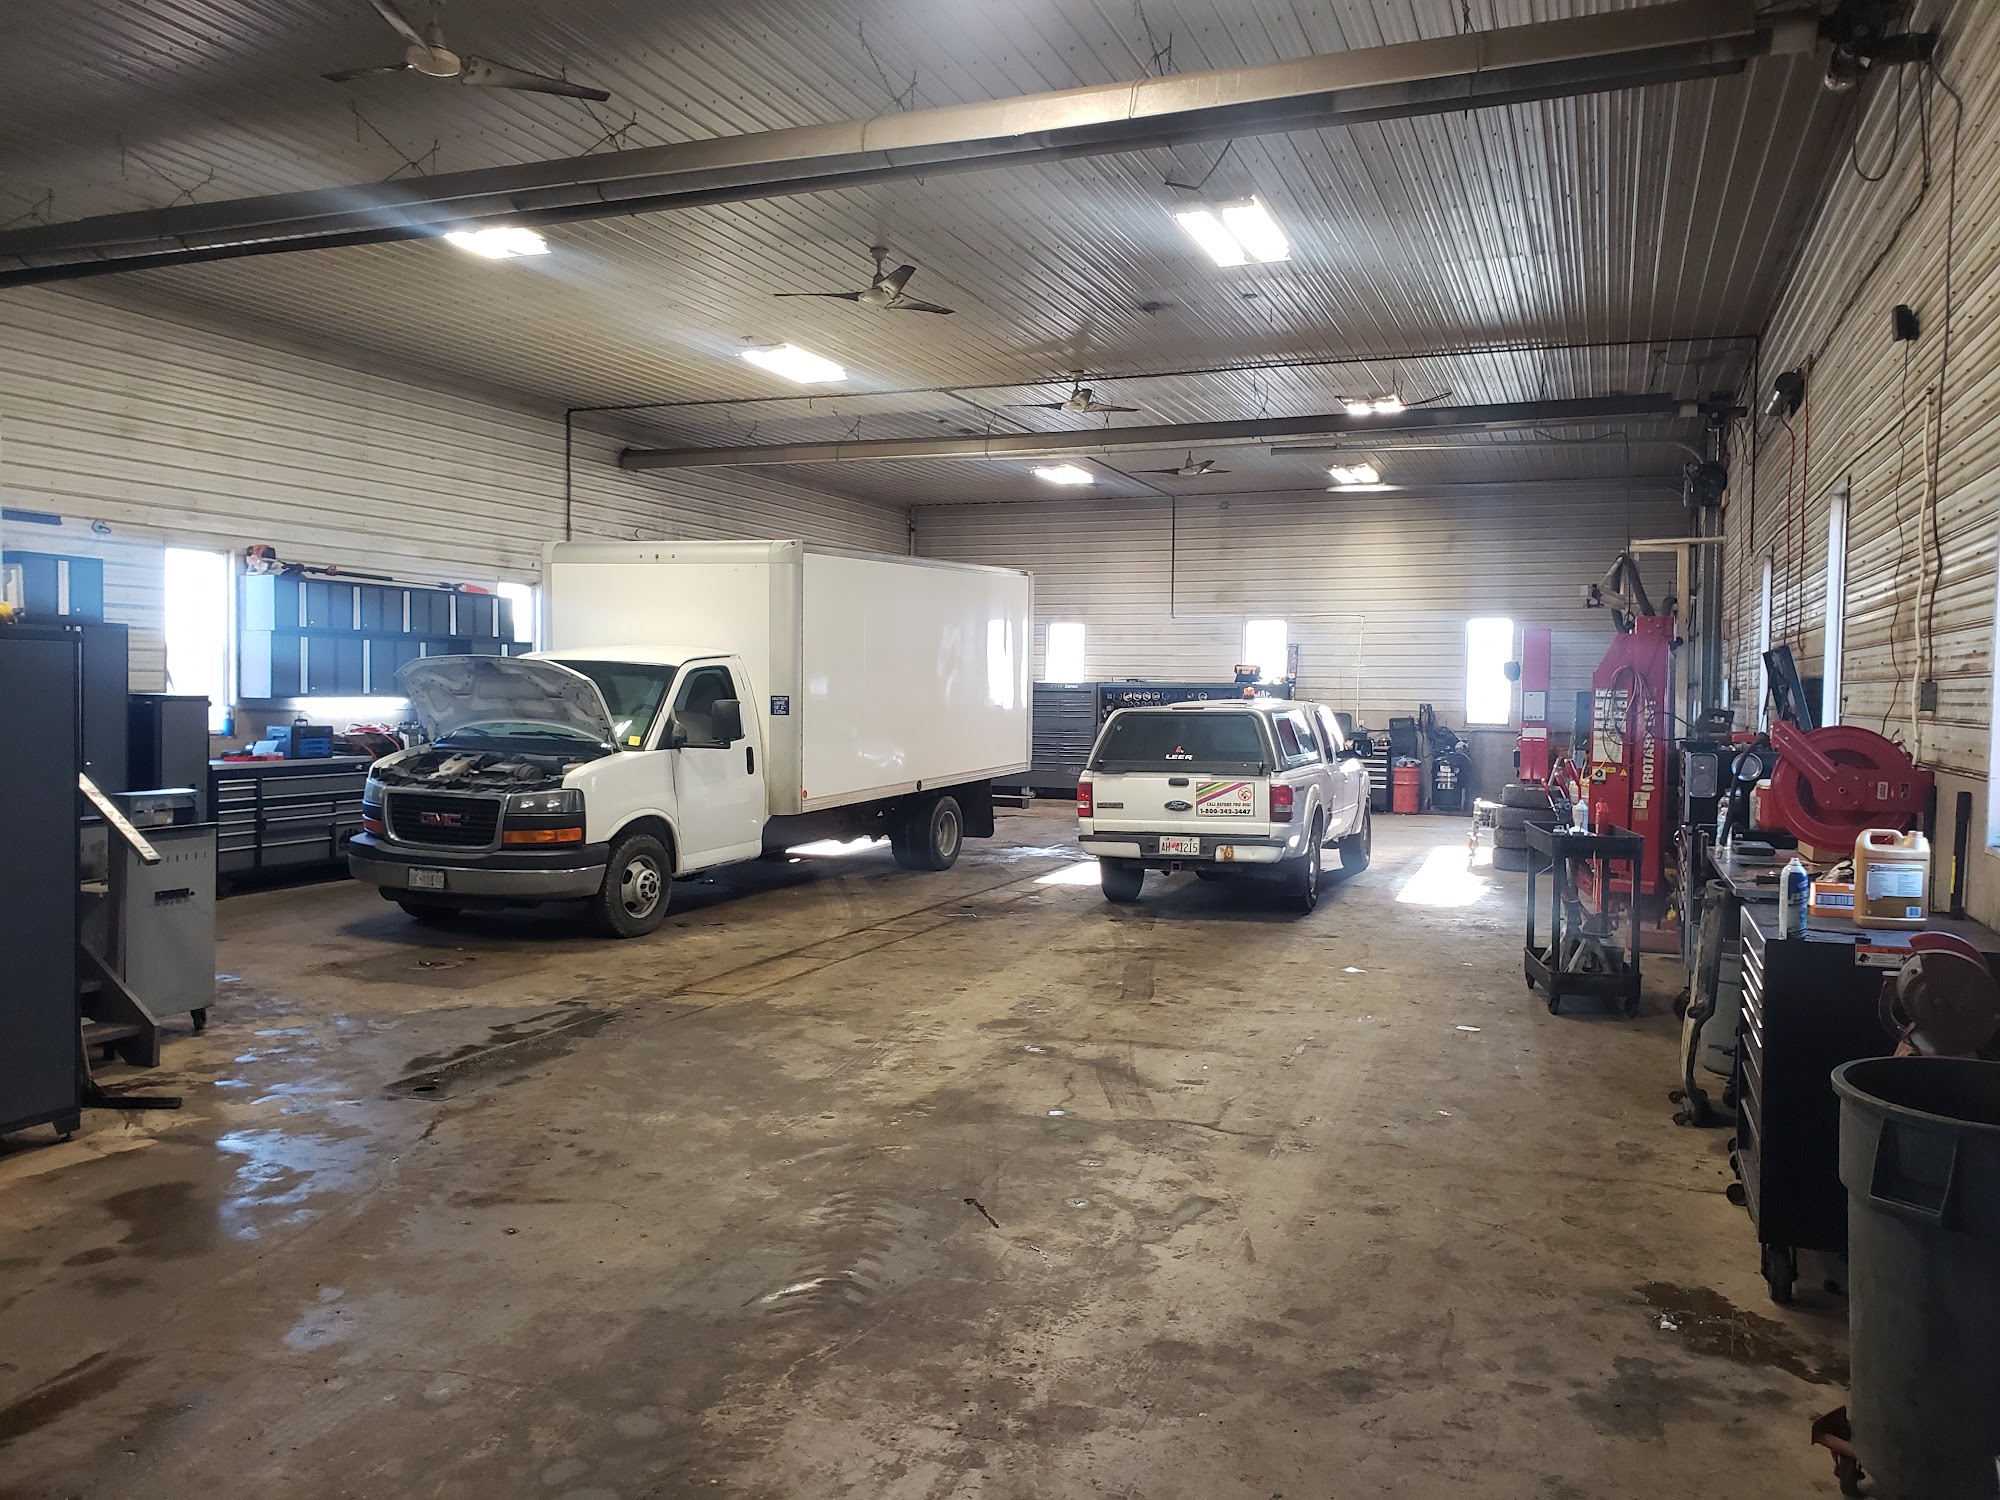 Dante's (Repair and Towing) 18928 Warden Ave., Sharon Ontario L0G 1V0